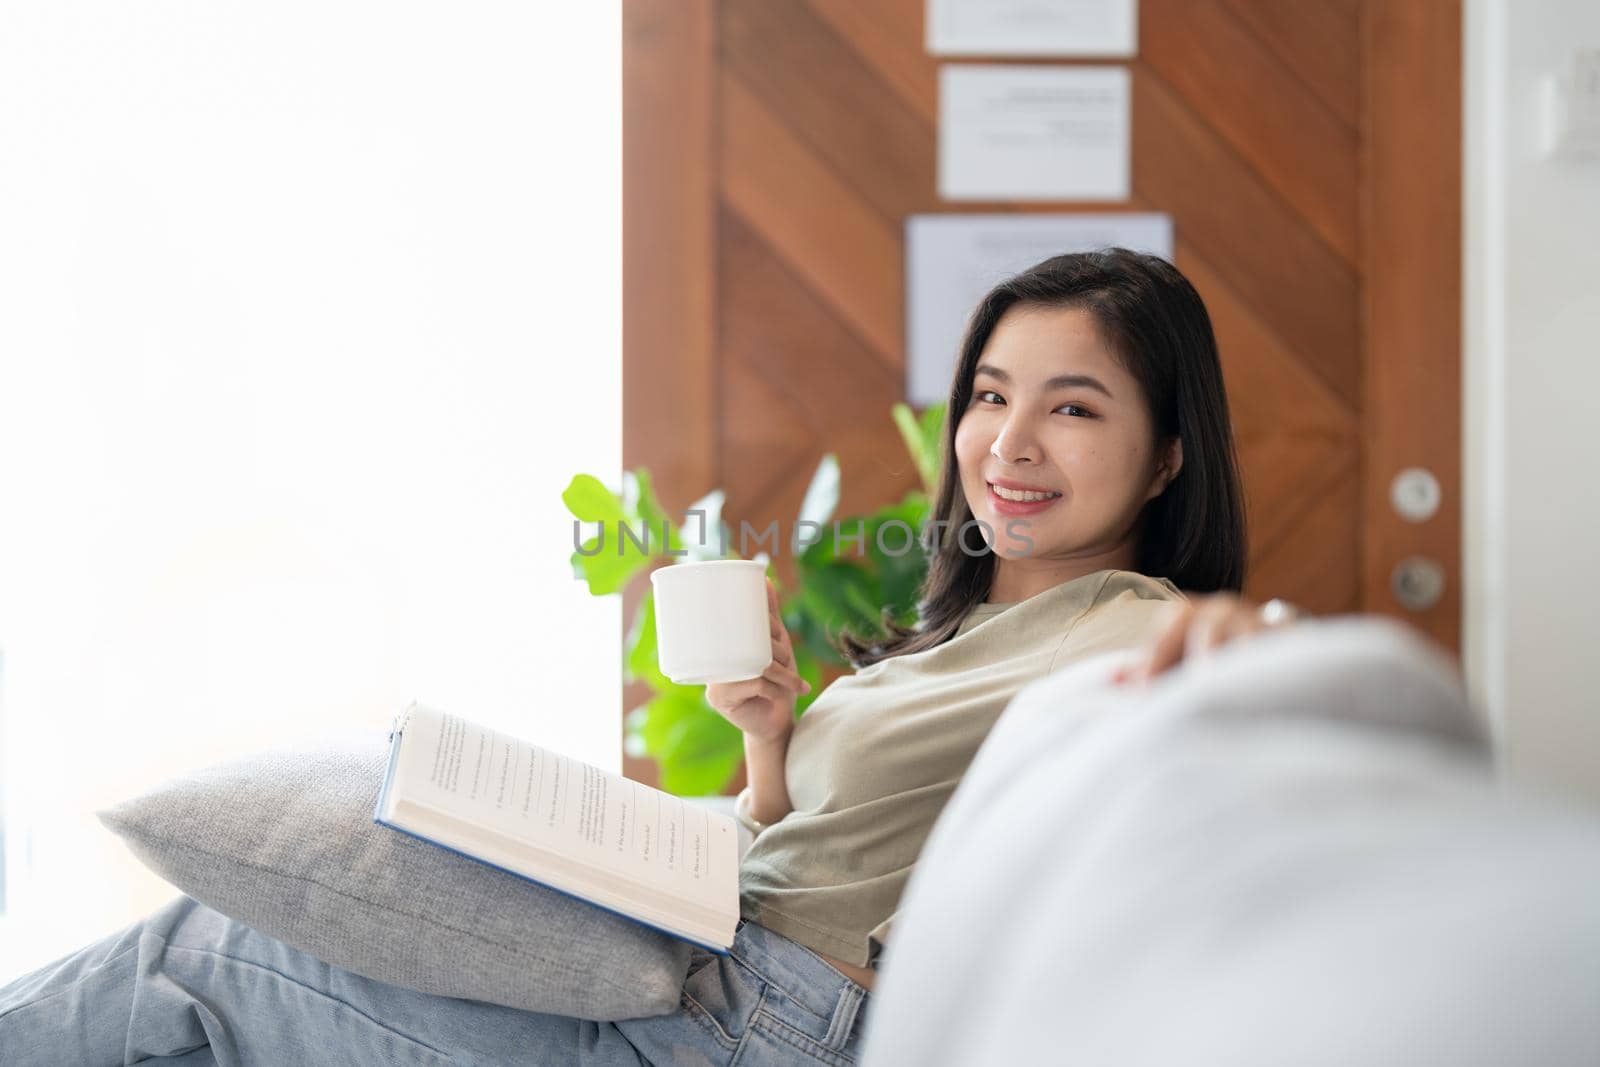 Smiling asian woman on couch reading a book looking at camera. coffee morning